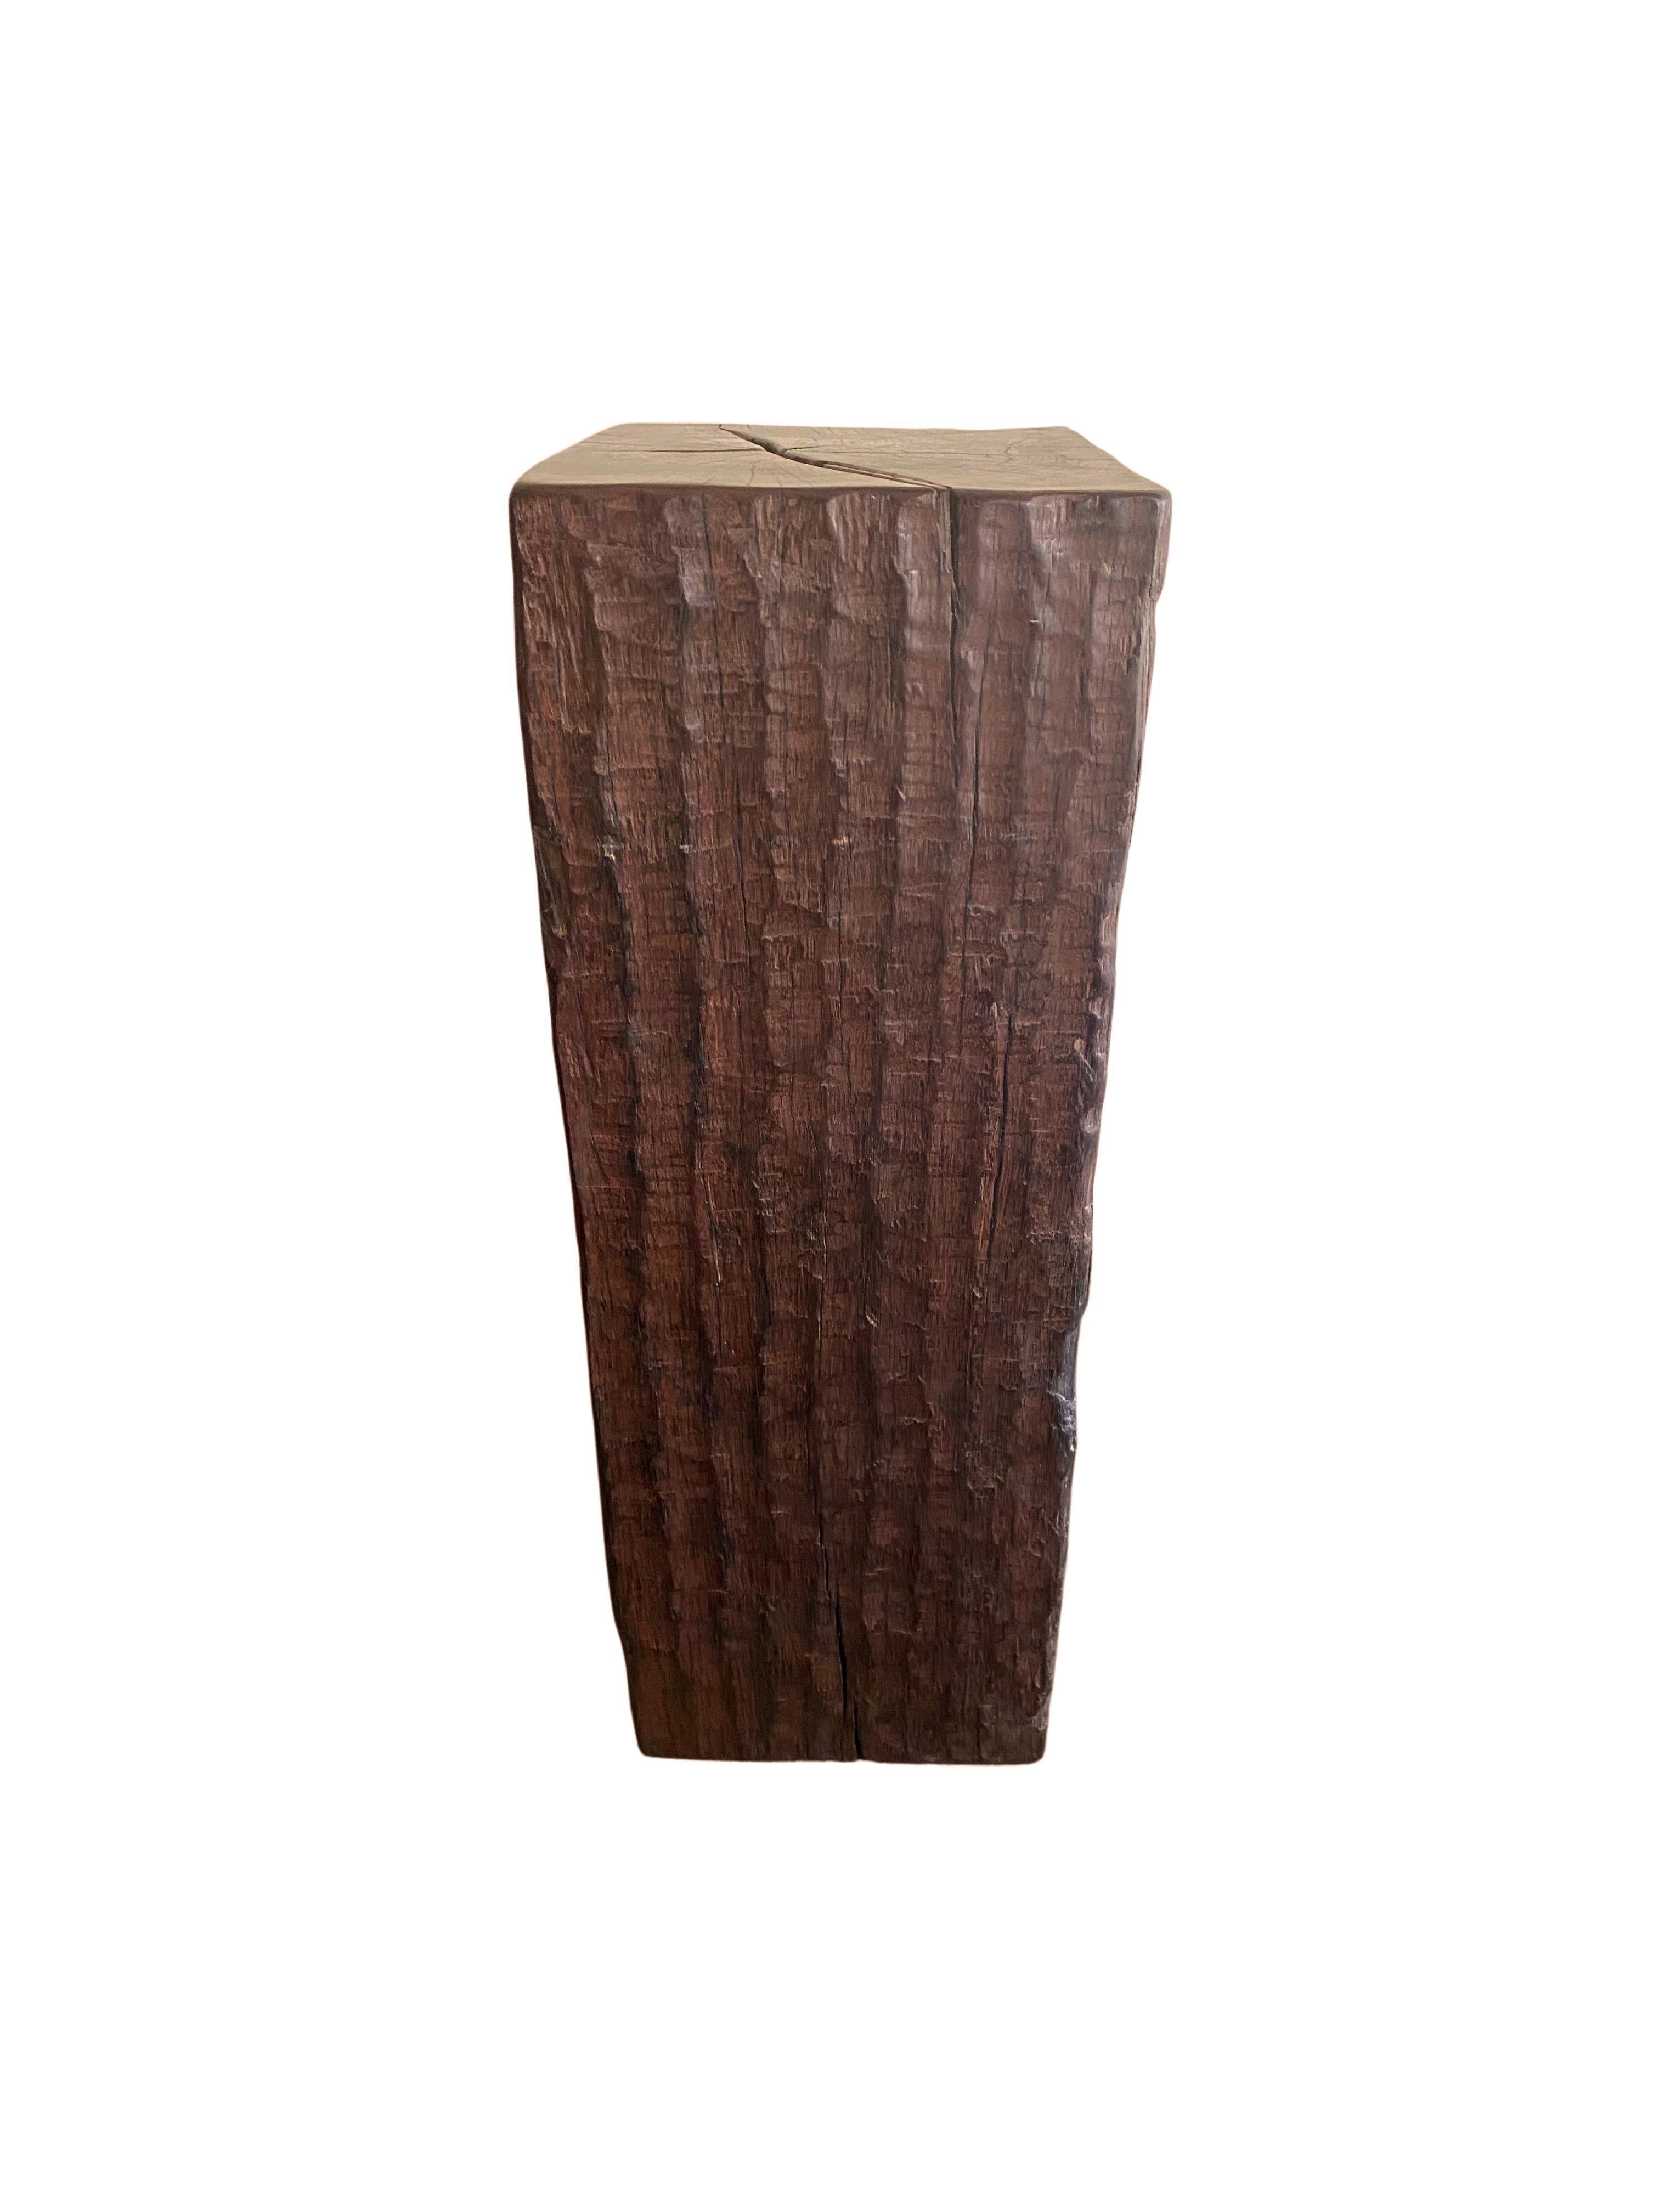 Indonesian Solid Iron Wood Pedestal with Stunning Wood Texture For Sale